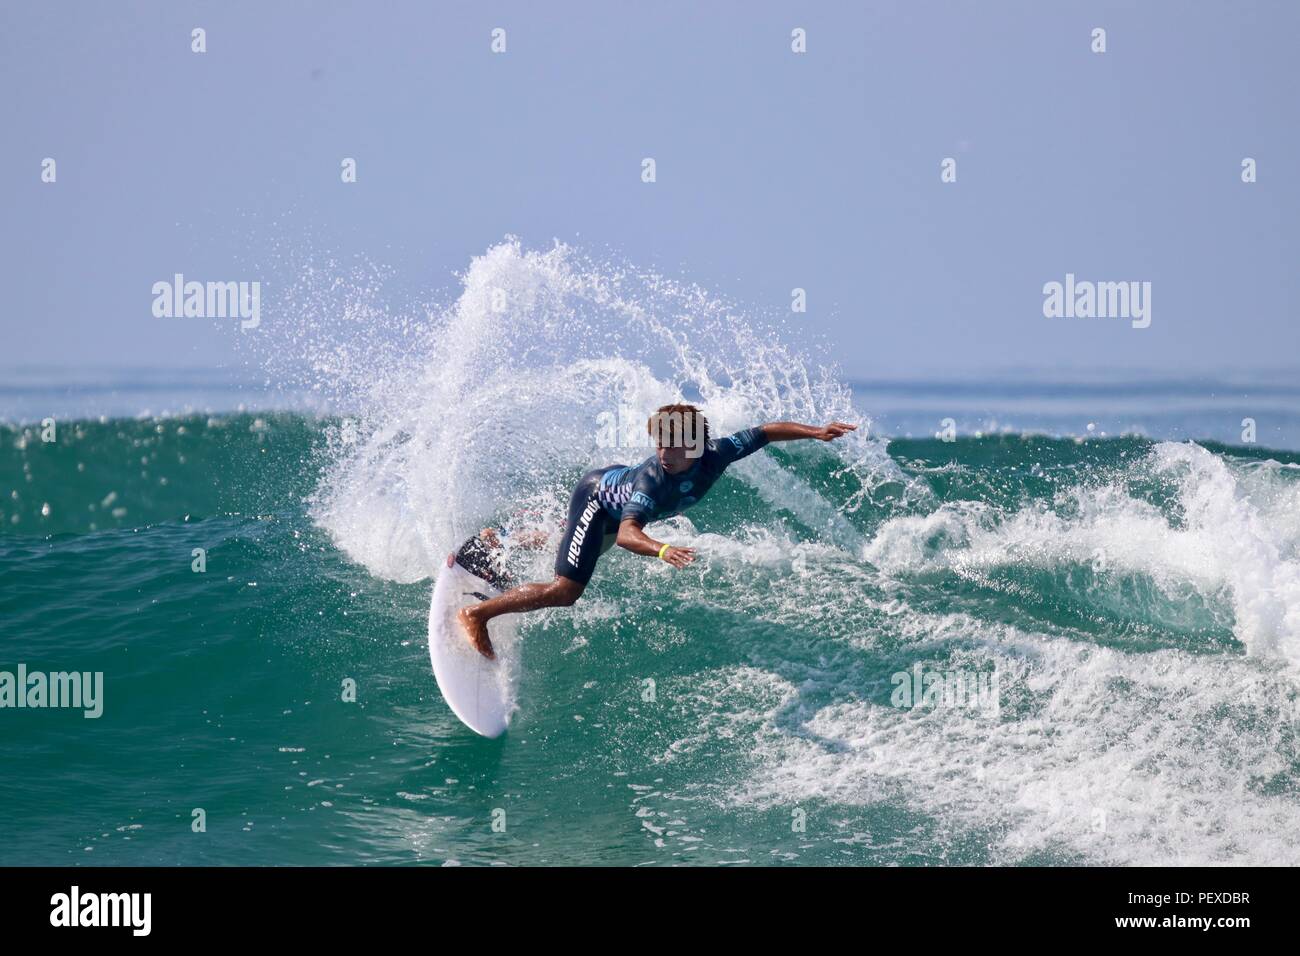 David do Carmo competing in the US Open of Surfing 2018 Stock Photo